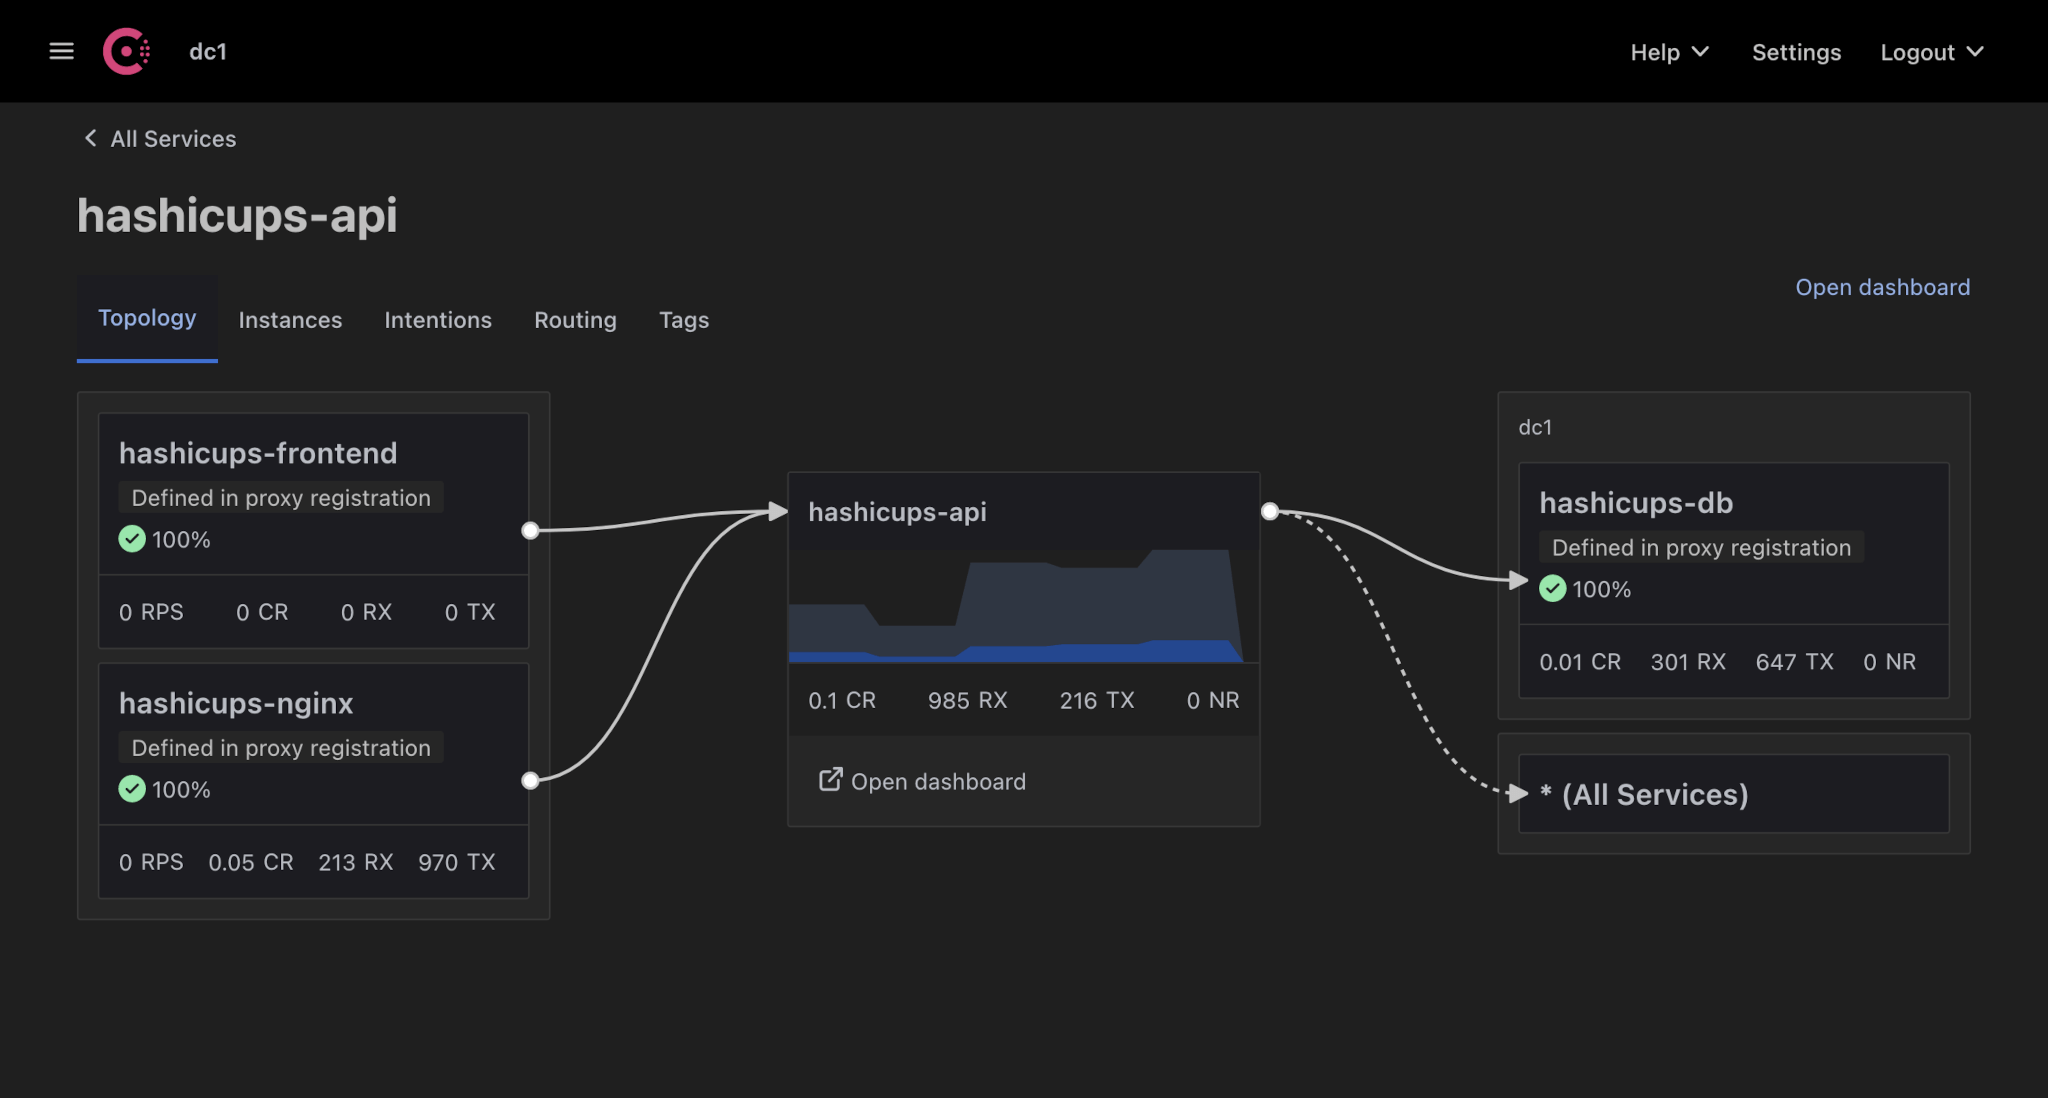 Consul UI with topology visualization for hashicups-api service